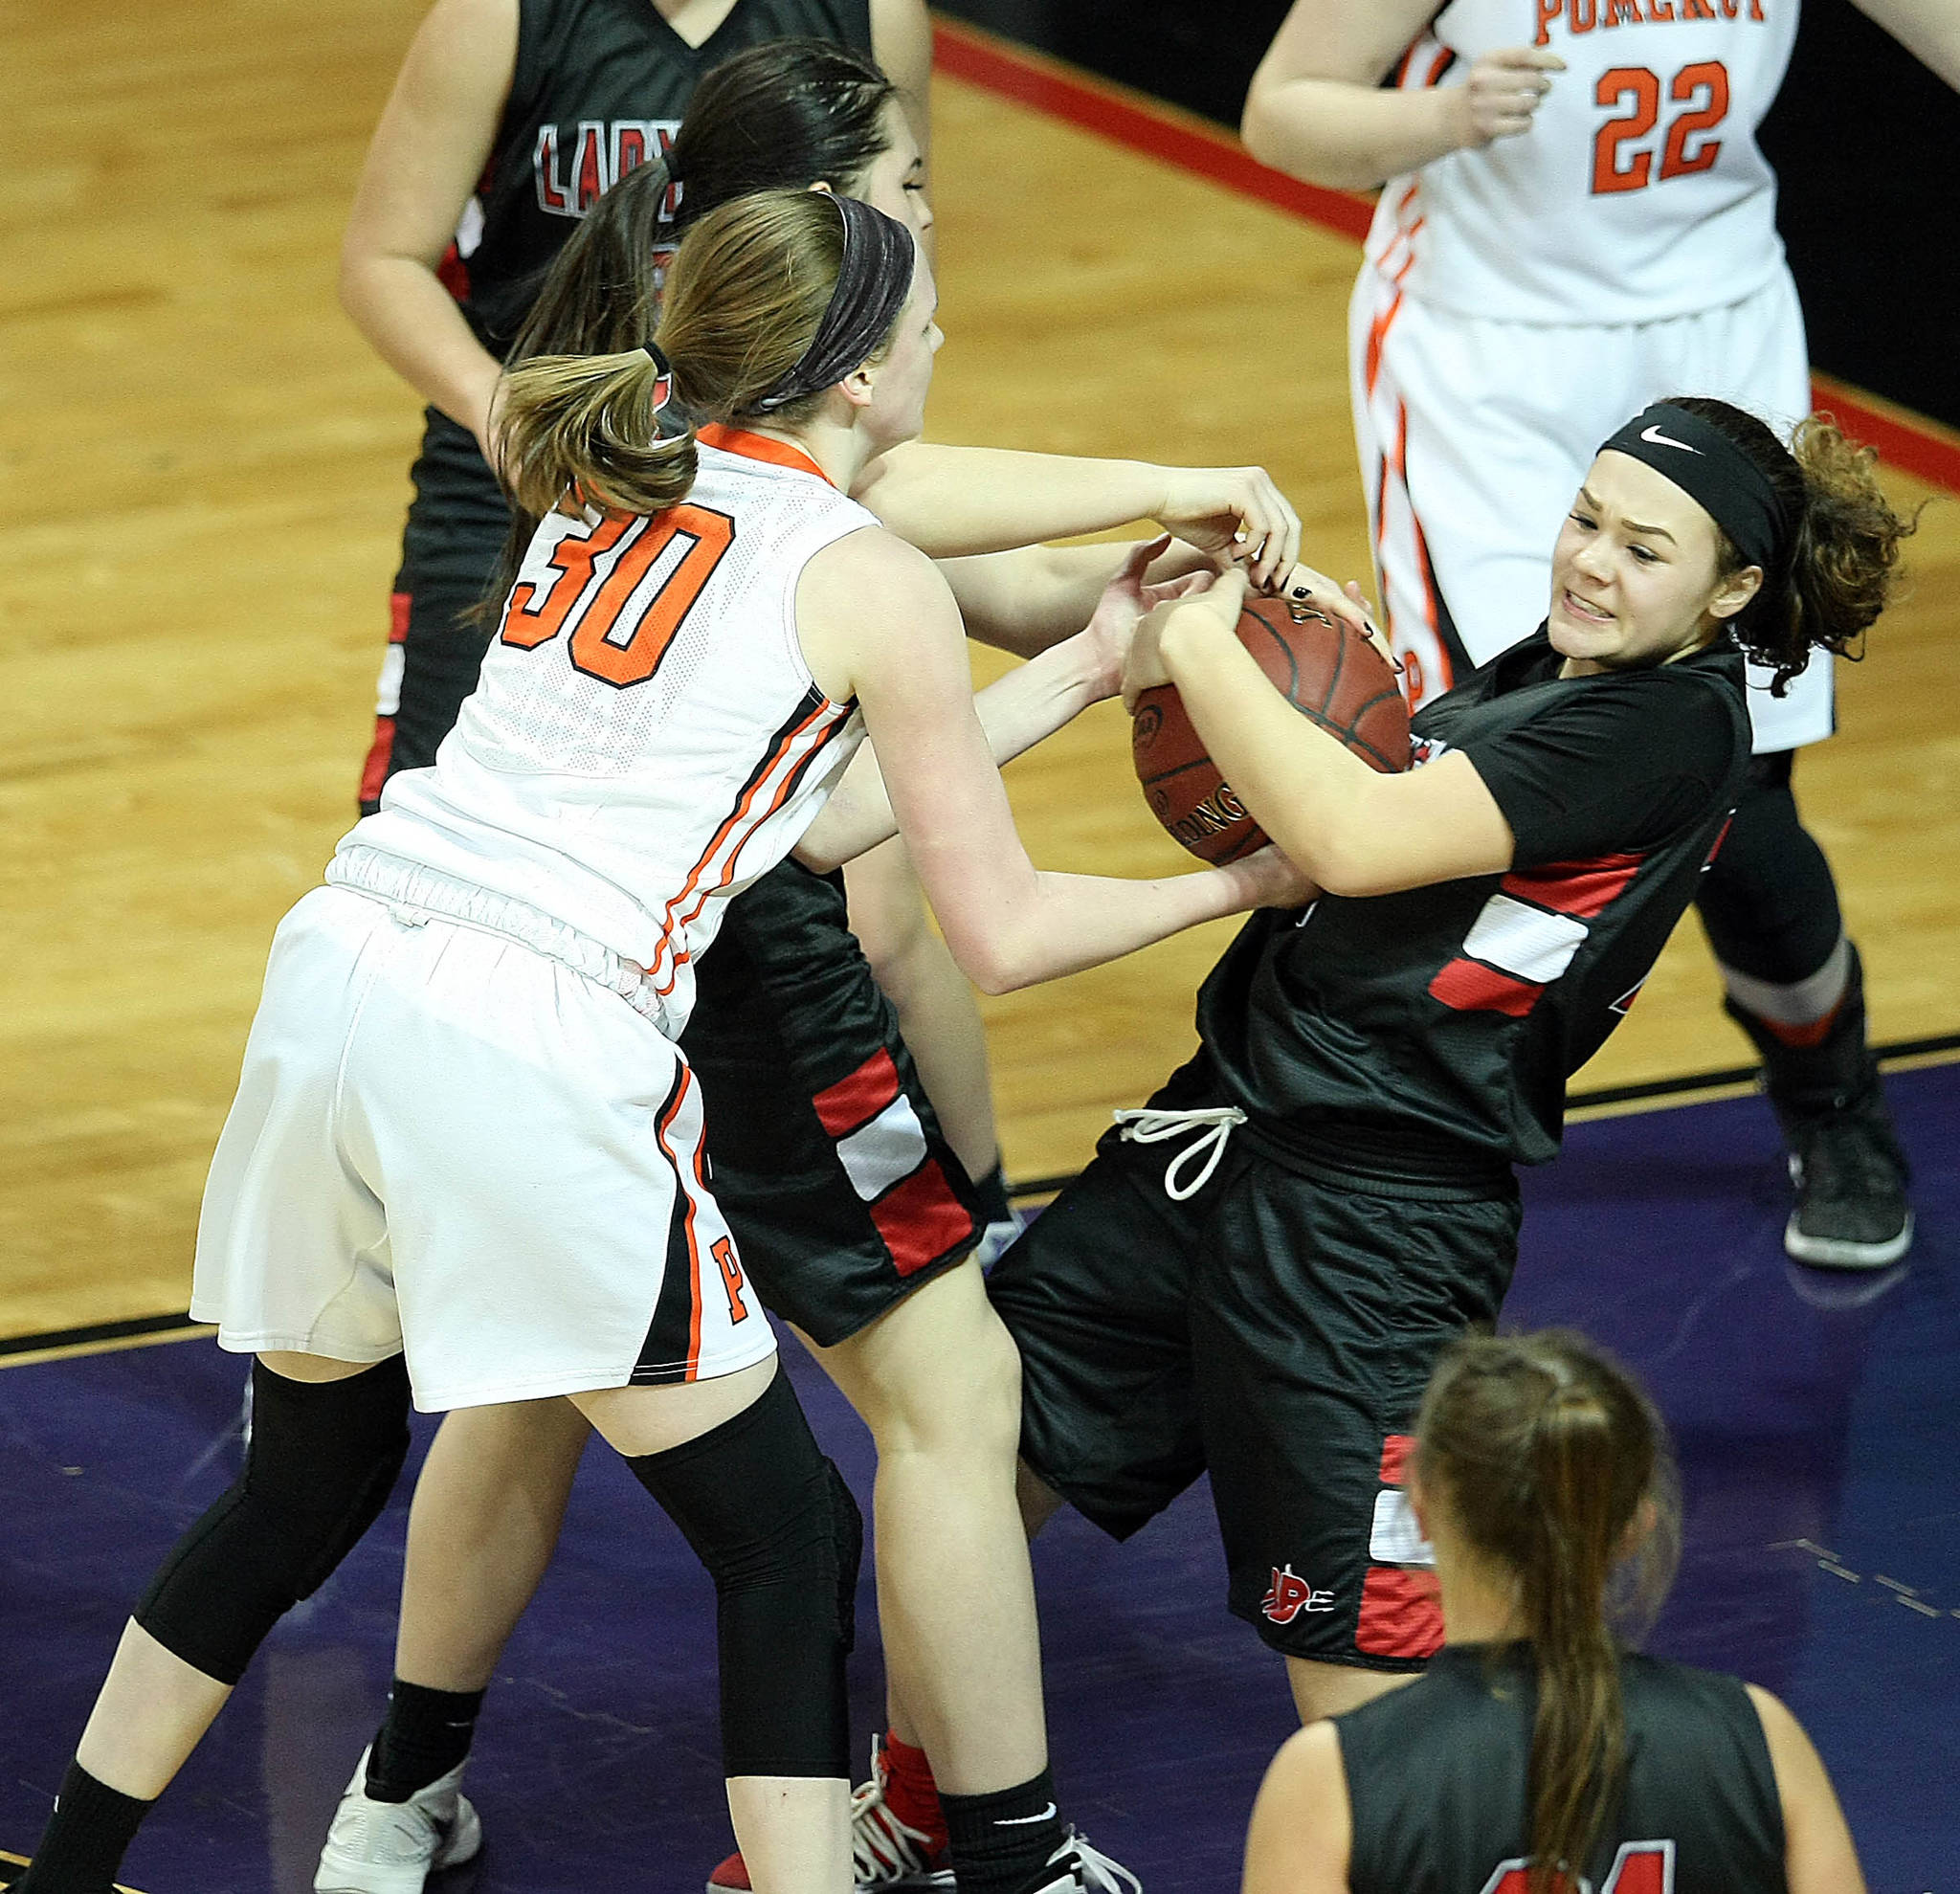 David Willoughby/for Peninsula Daily News                                Neah Bay’s Patience Swan, right, scraps for possession of the ball during with Pomeroy’s Maddy Dixon during the Red Devils’ 44-29 Class 1B state semifinal loss Friday at Spokane Arena.